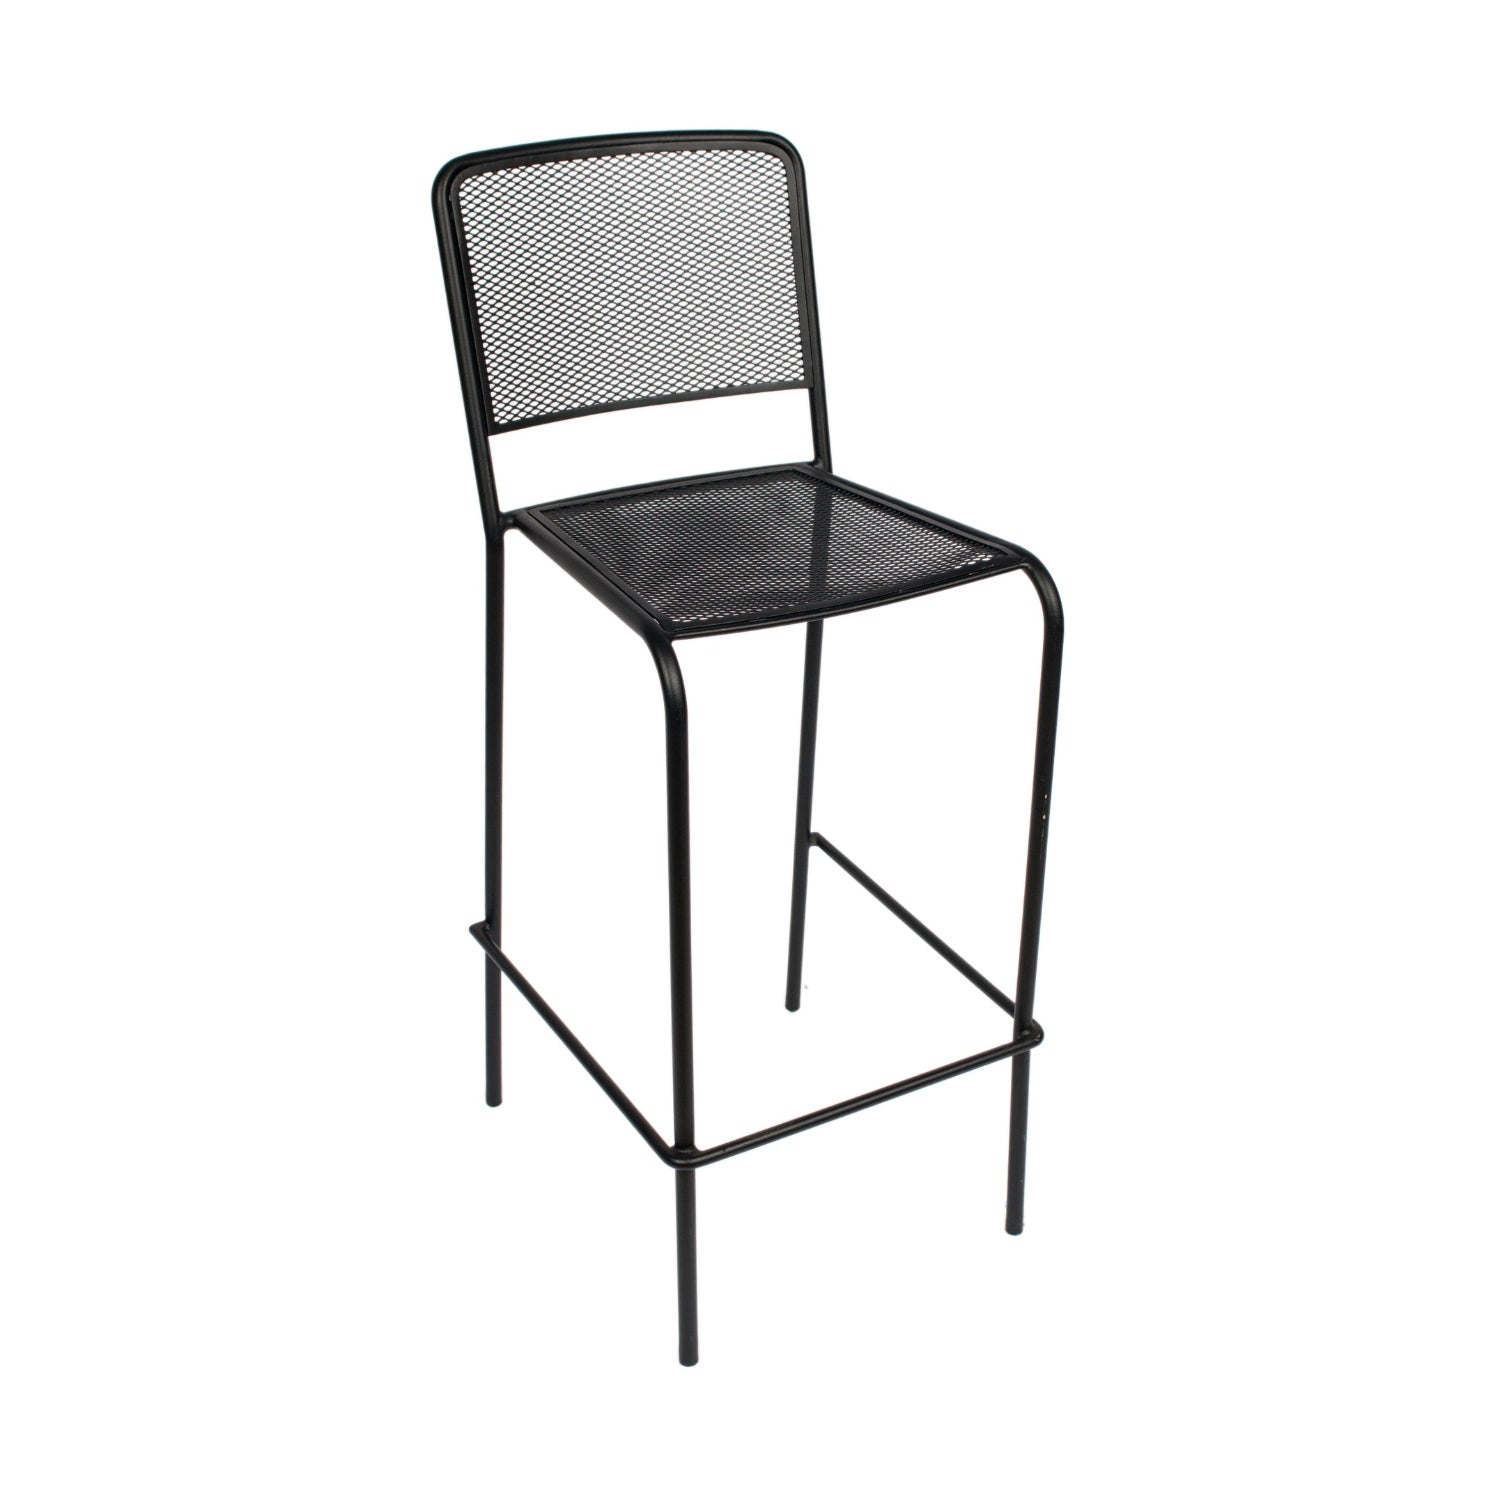 Chesapeake Collection Outdoor/Indoor Black Steel Barstool with Micro Mesh Seat and Back